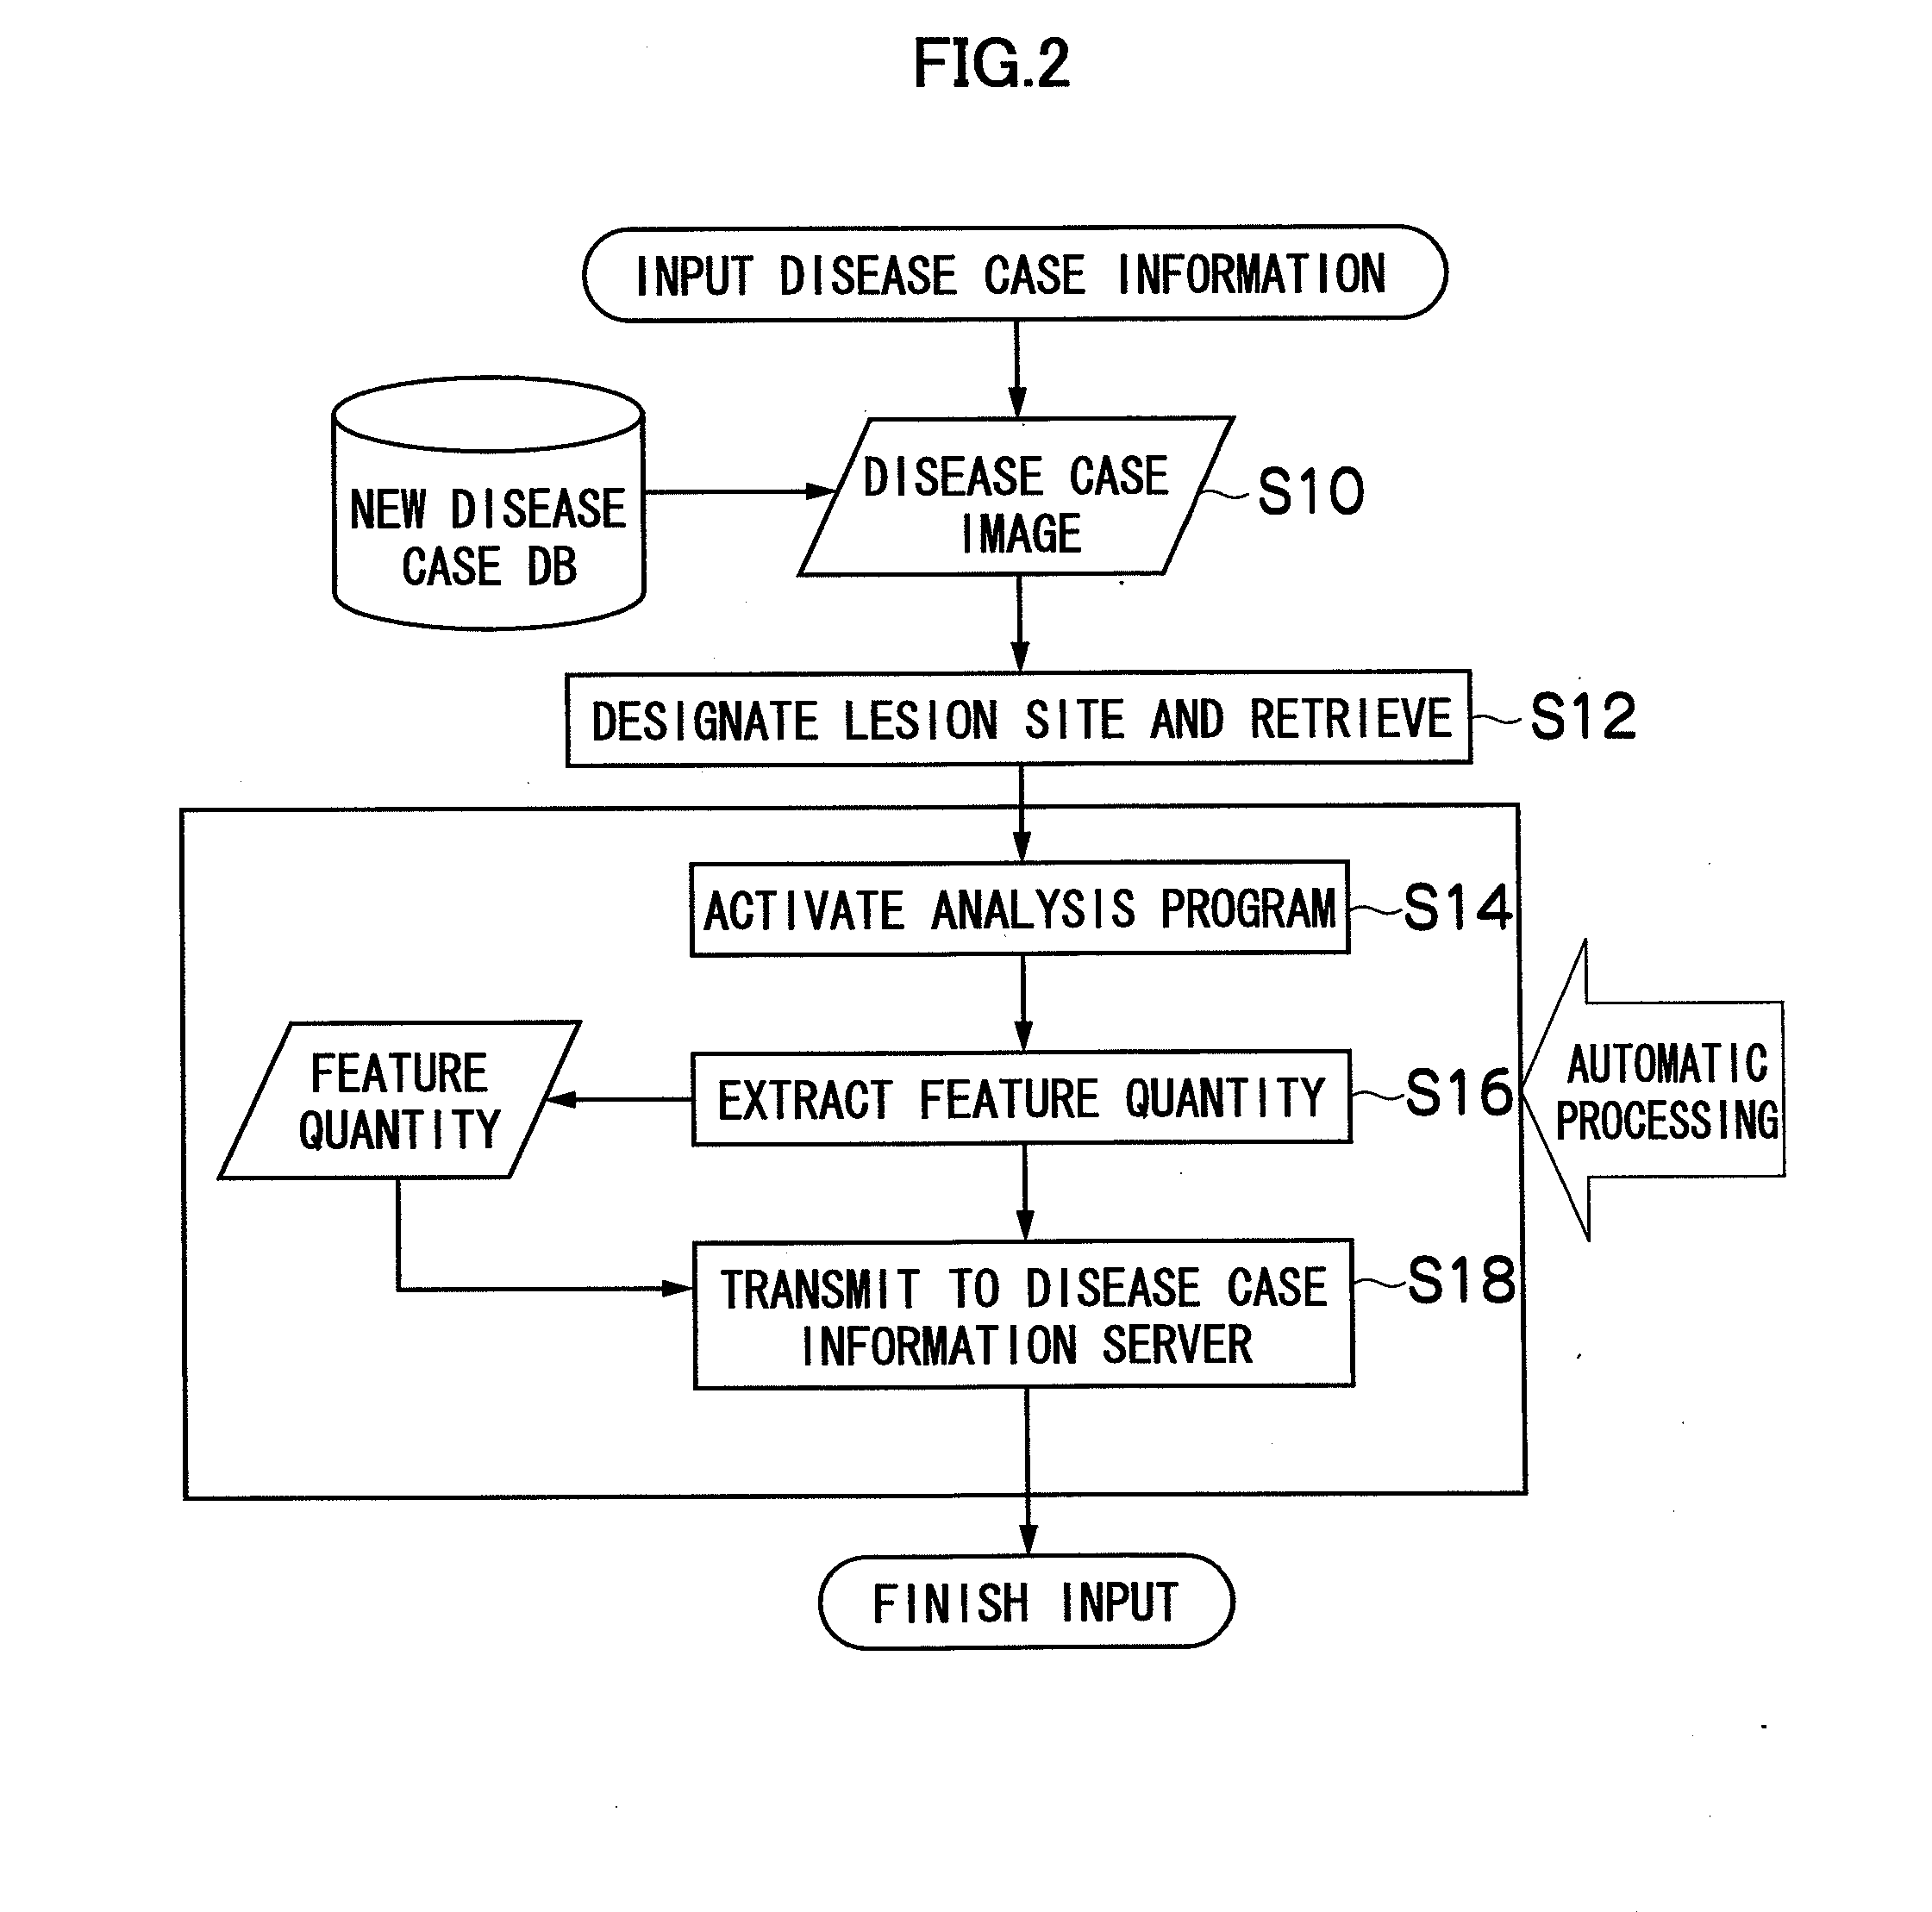 Image diagnosis supporting apparatus and system